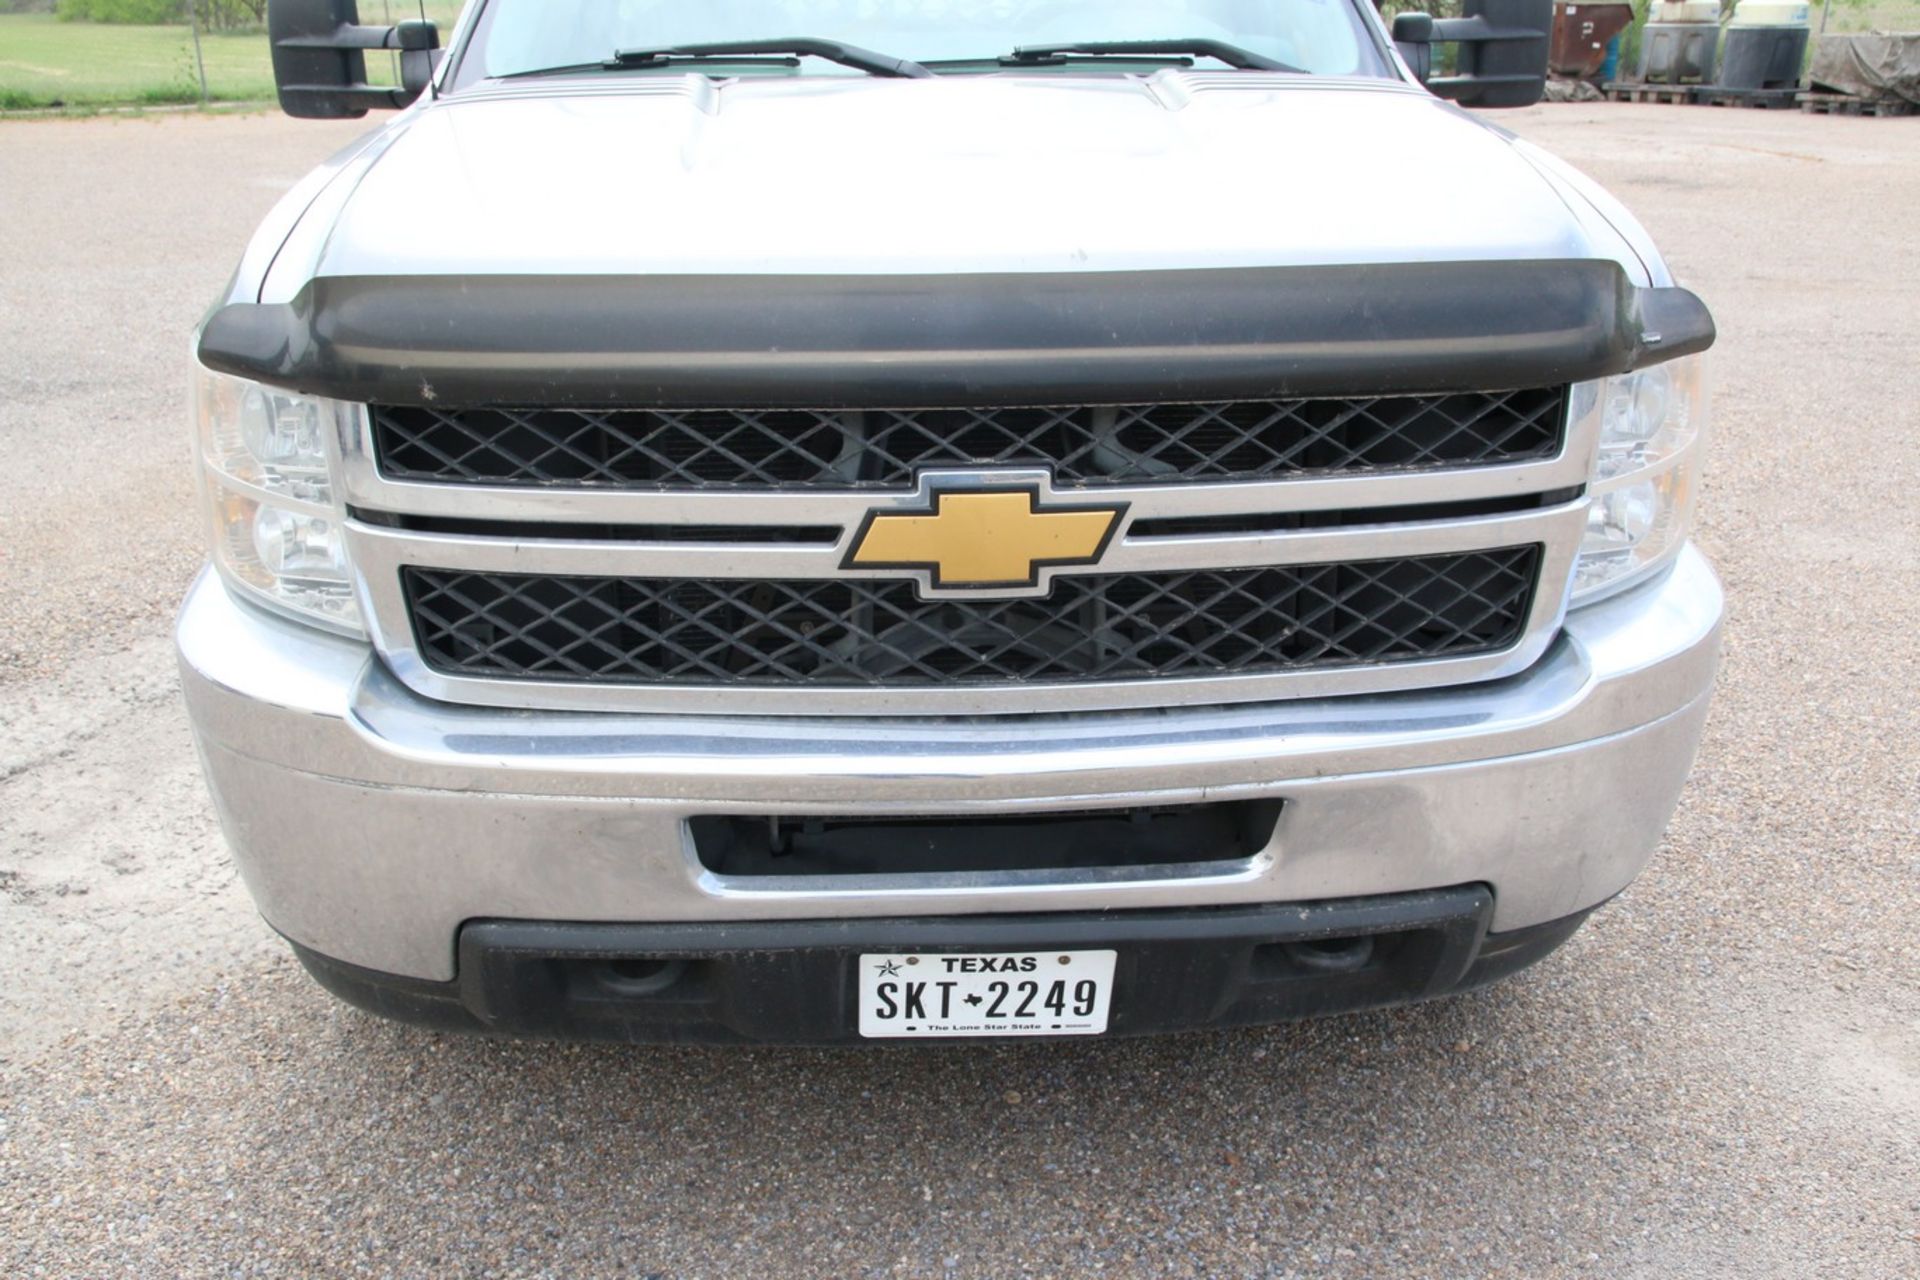 2013 Chevy 3500HD Chevy Silverado 3500HD Work Truck Good Tires, Good Interior, Automatic, 173,396 - Image 4 of 14